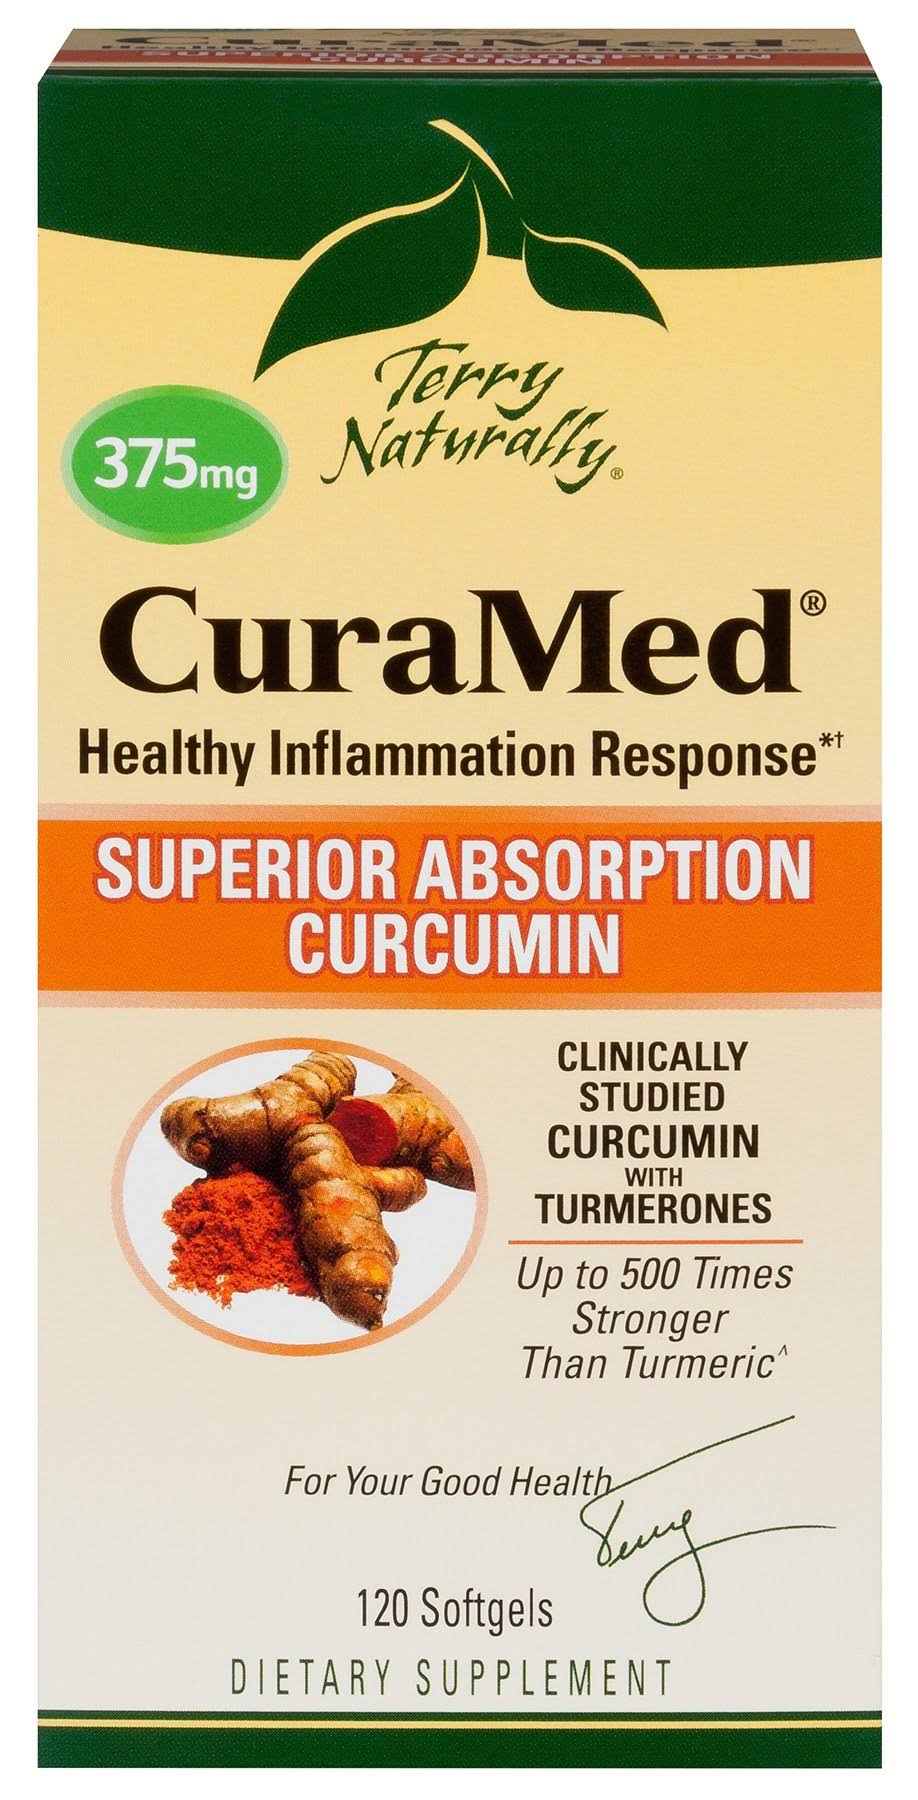 Terry Naturally CuraMed - 375mg, 120 softgels